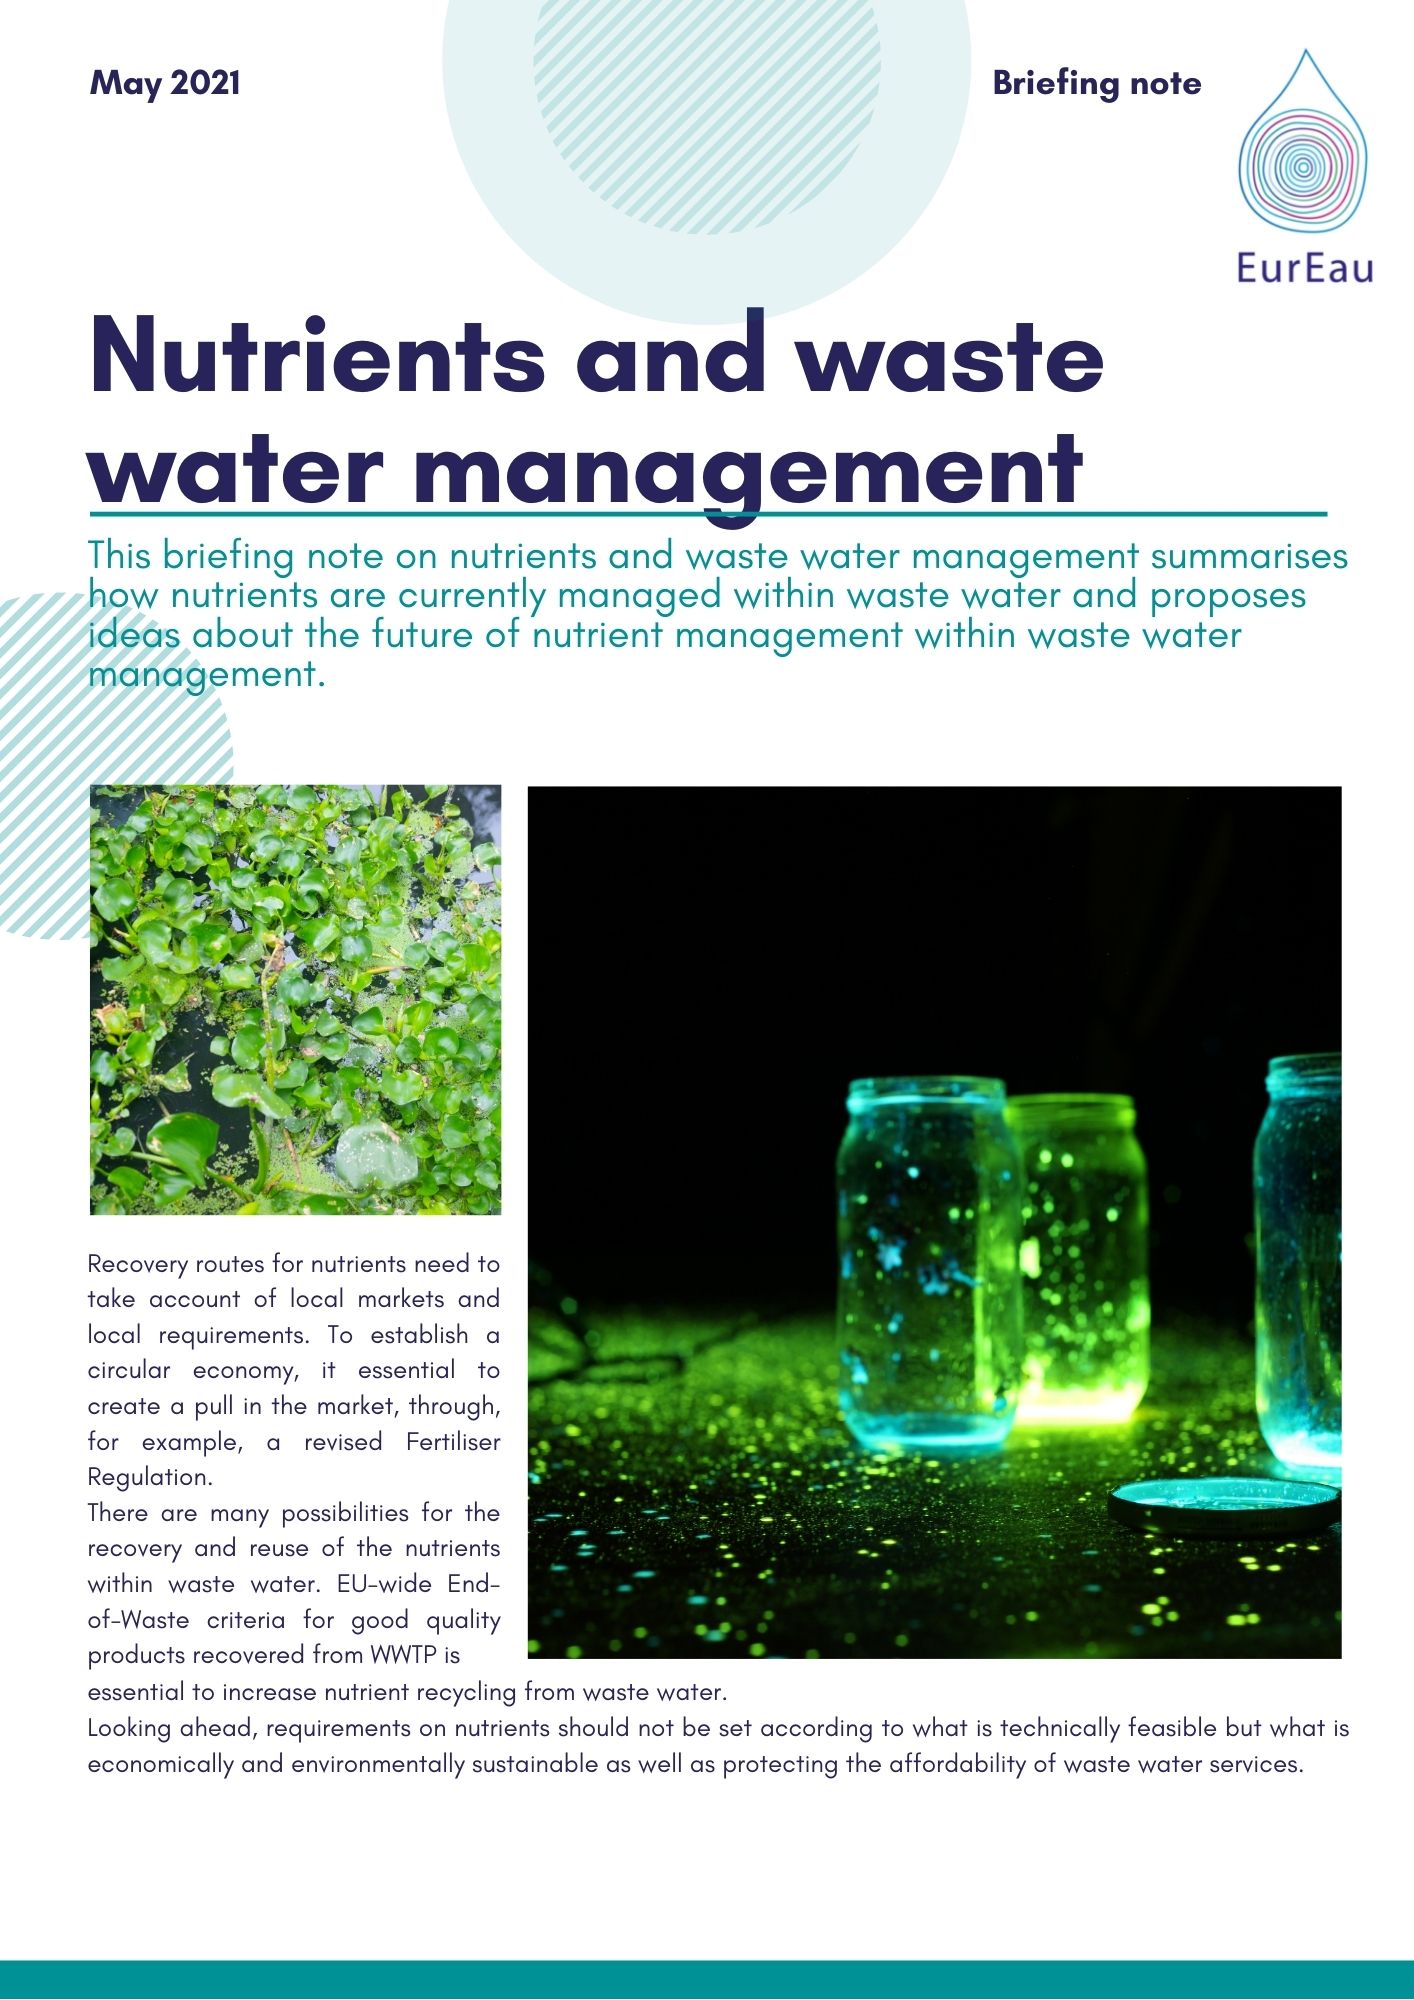 Briefing Note on nutrients and waste water management